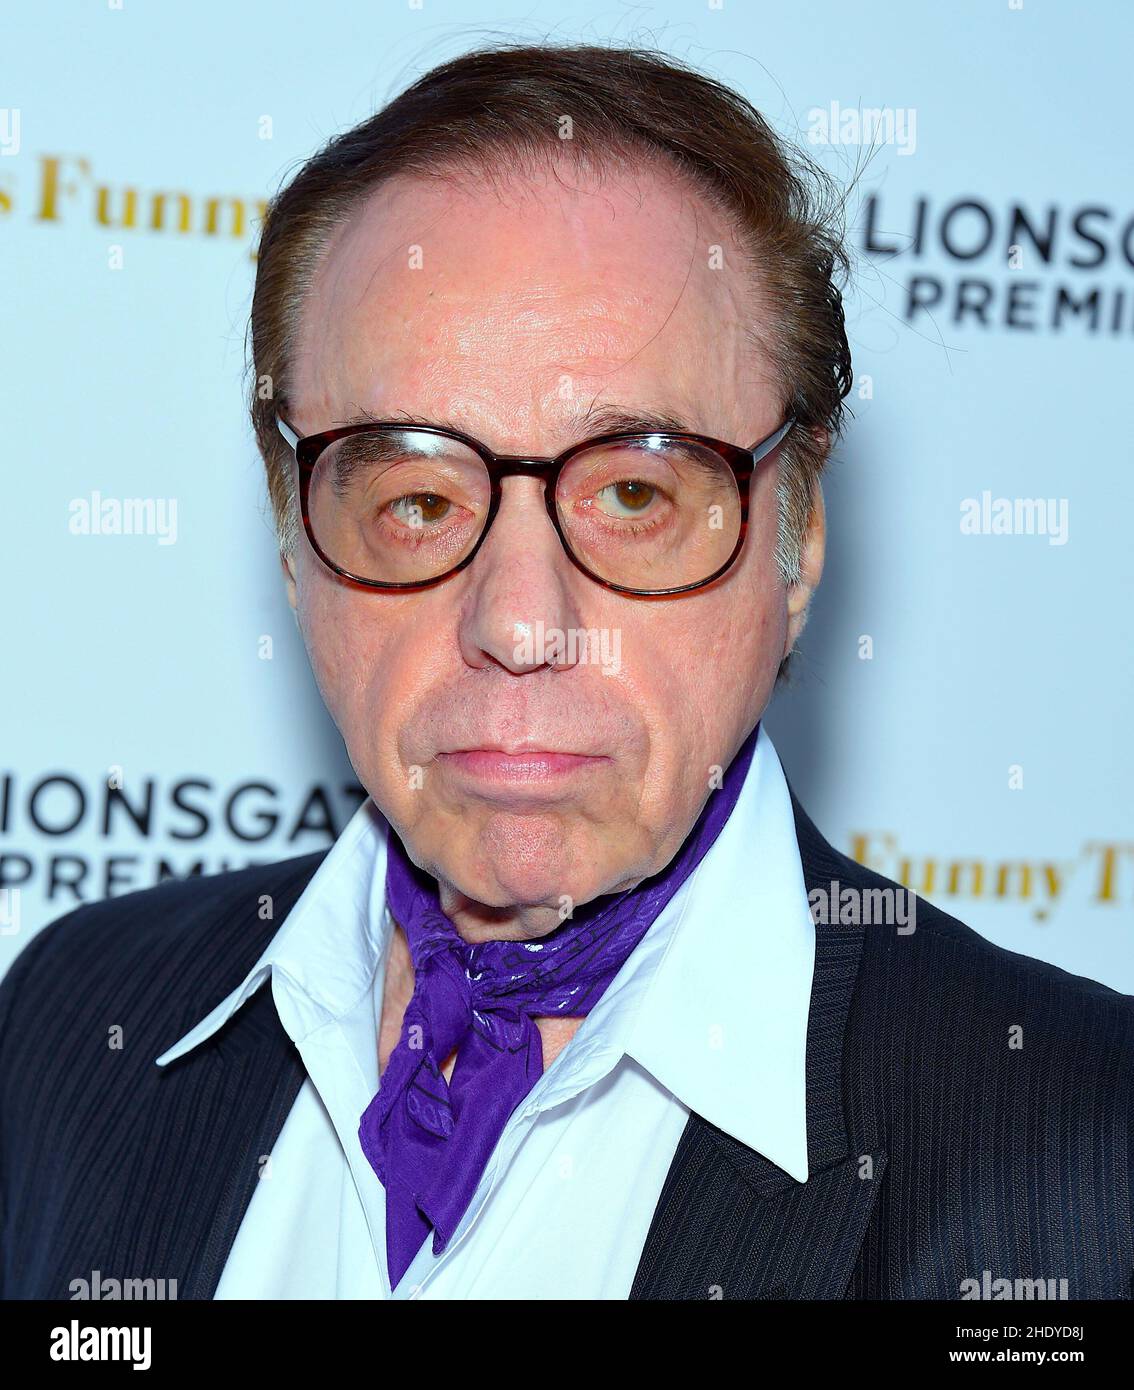 January 07, 2022: PETER BOGDANOVICH, the Oscar-nominated director of movies like ''The Last Picture Show'' and ''Paper Moon,'' whose off-screen life was as colorful as his films, has died, according to multiple reports, citing his daughter Antonia Bogdanovich. He was 82. FILE PHOTO SHOT ON:  Aug. 19, 2015, Hollywood, California, USA: Peter Bogdanovich arrives for the premiere of the film 'She's Funny That Way' at the Harmony Gold theater. (Credit Image: © Lisa O'Connor/ZUMA Wire) Stock Photo